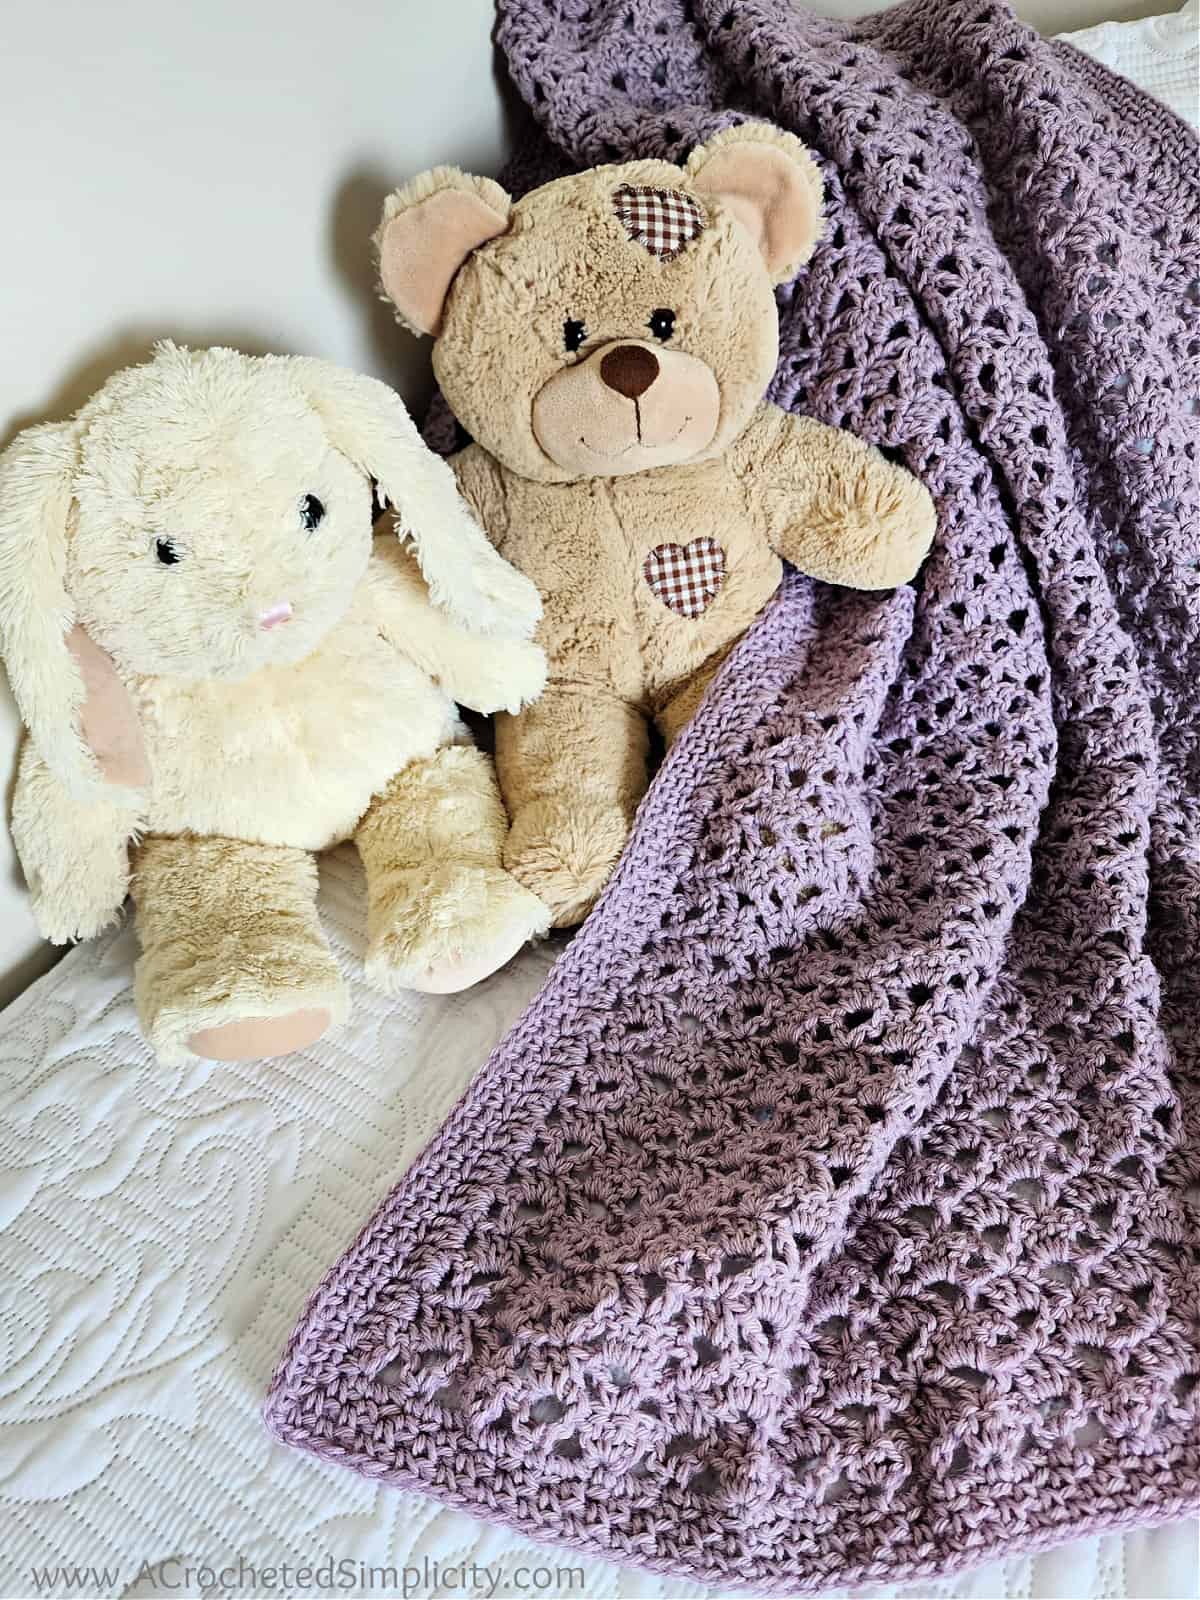 Lilac colored crochet lacy baby blanket with a cream colored stuffed bunny and light brown teddy bear